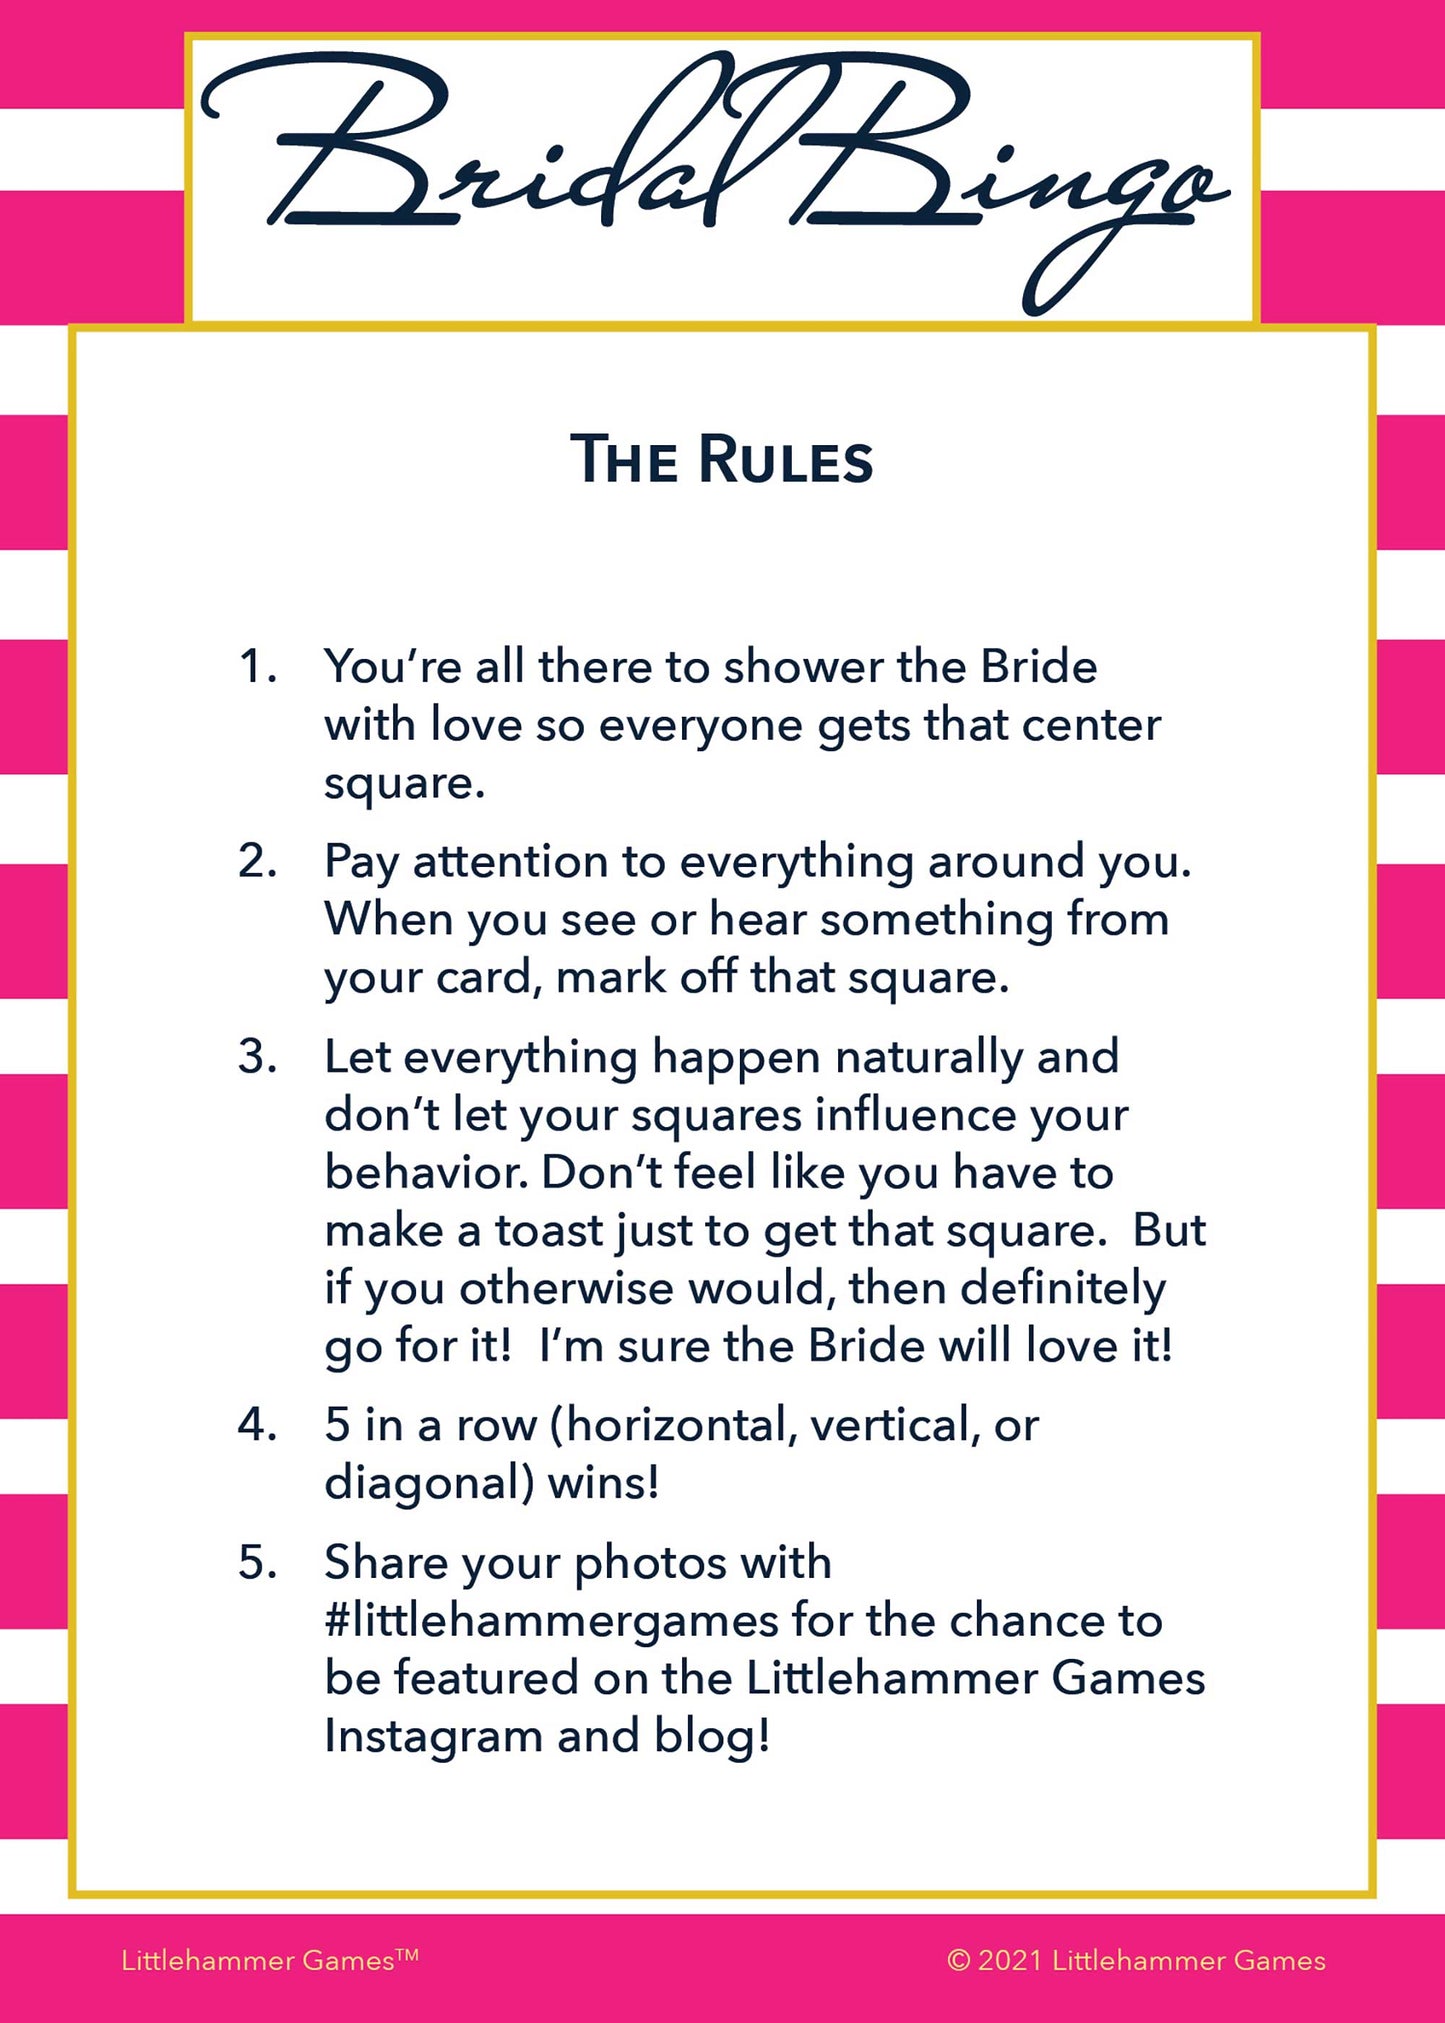 Bridal Bingo rules card on a hot pink-striped background